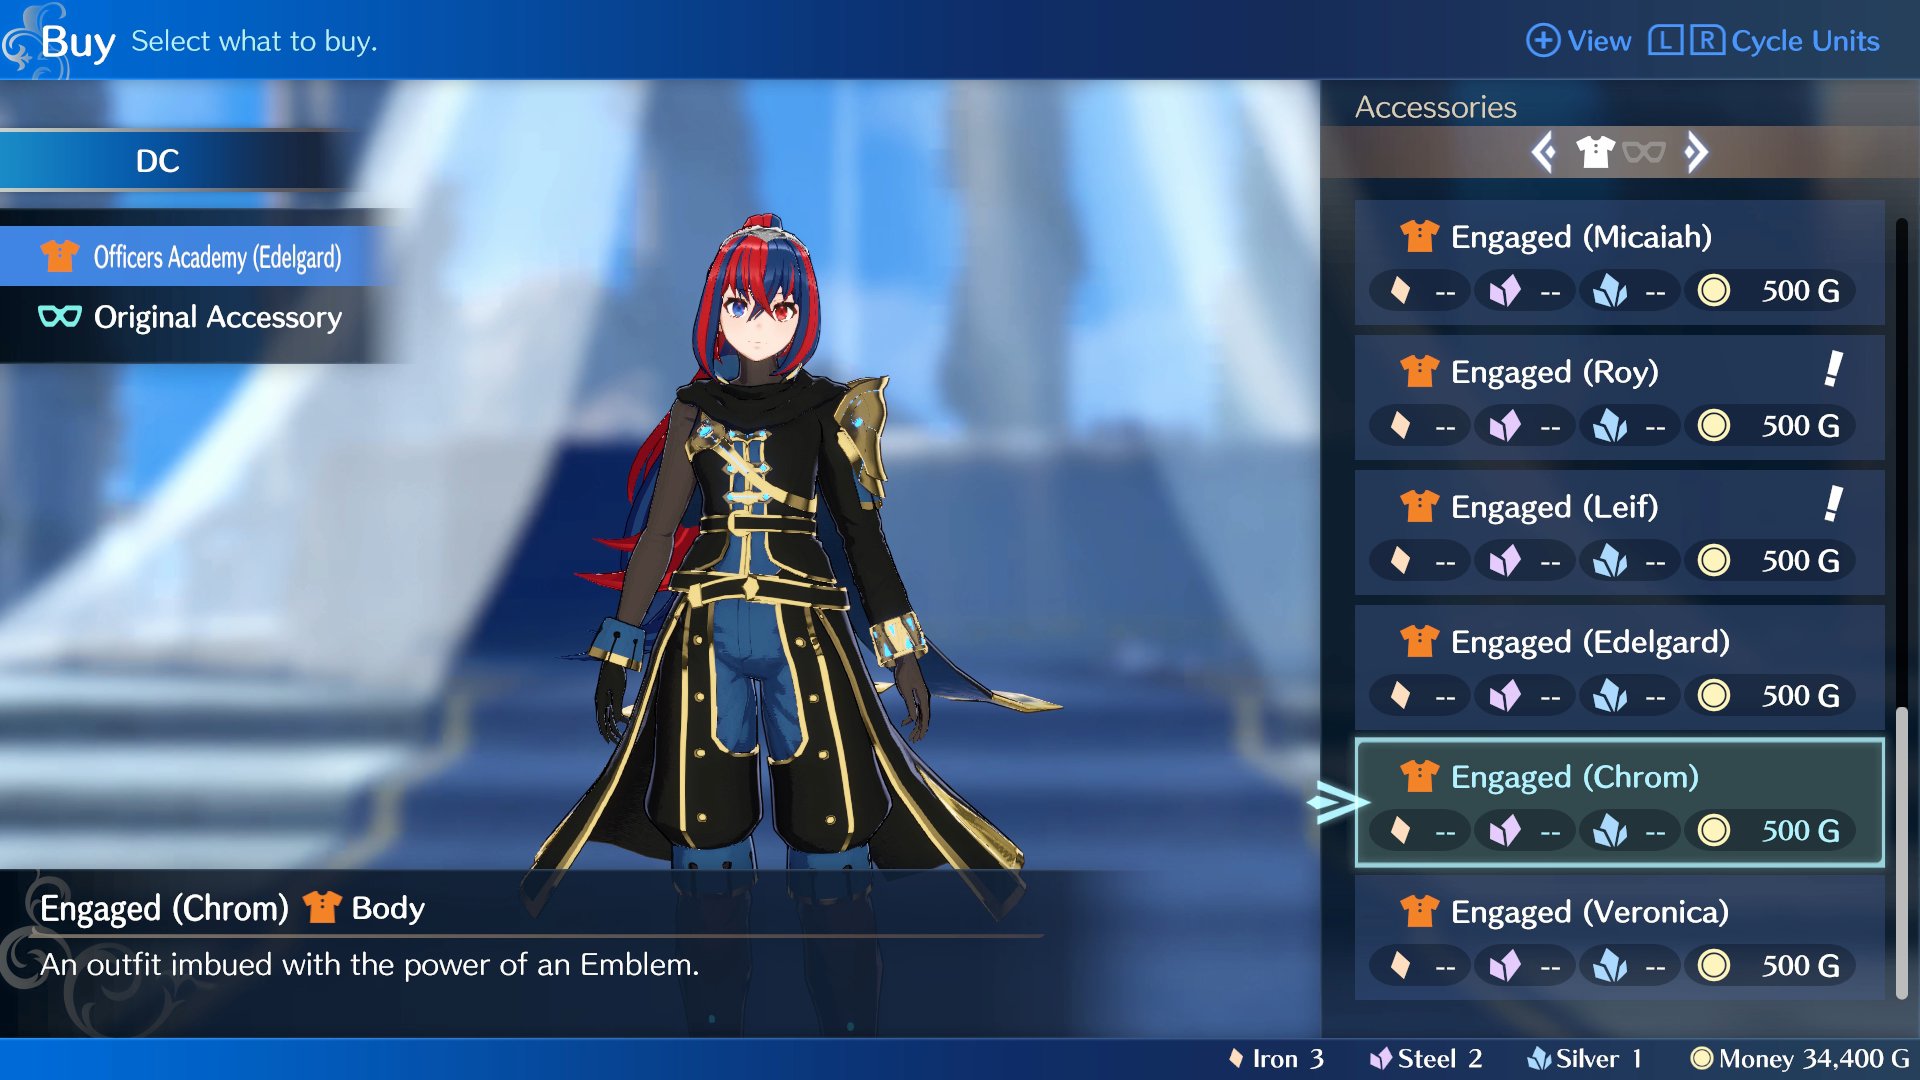 DeathChaos on X: "Fire Emblem Engage Battle Outfits and More Outfits mod has been updated for game version 1.3.0 https://t.co/I7pBJeCIUP" / X